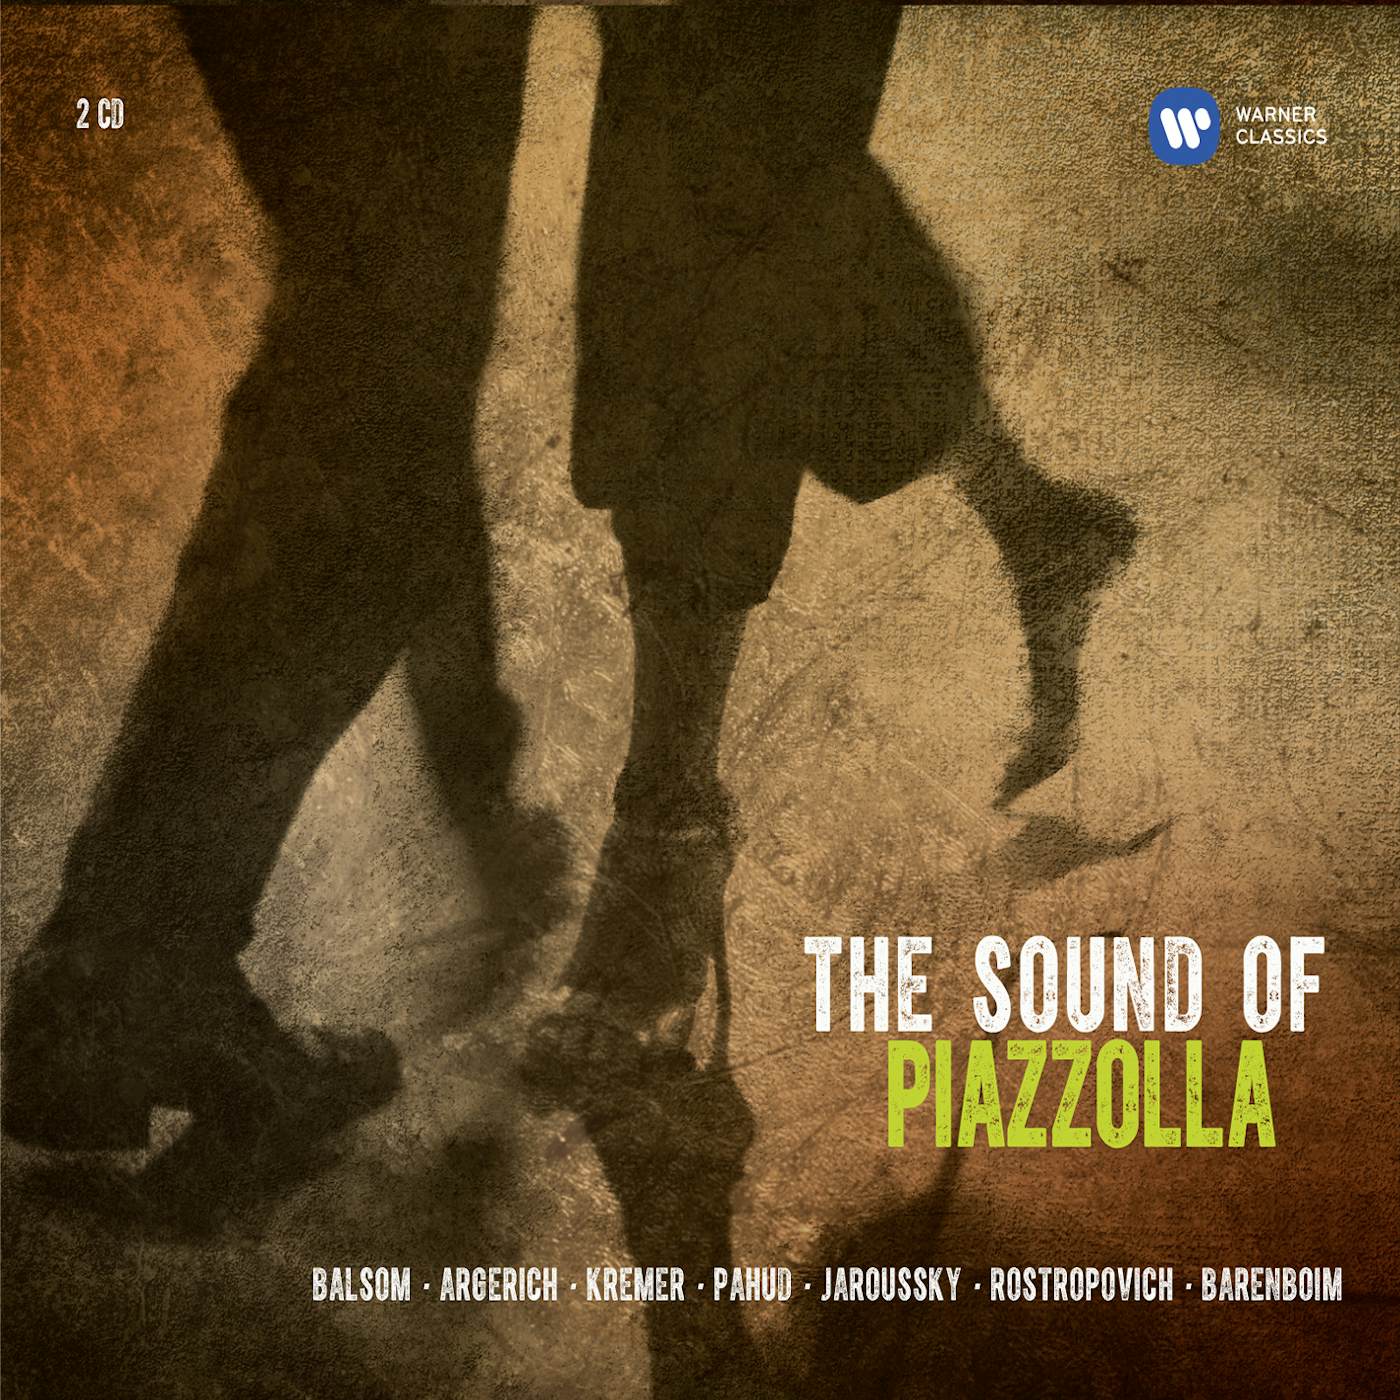 Astor Piazzolla SOUND OF PIAZZOLLA CD